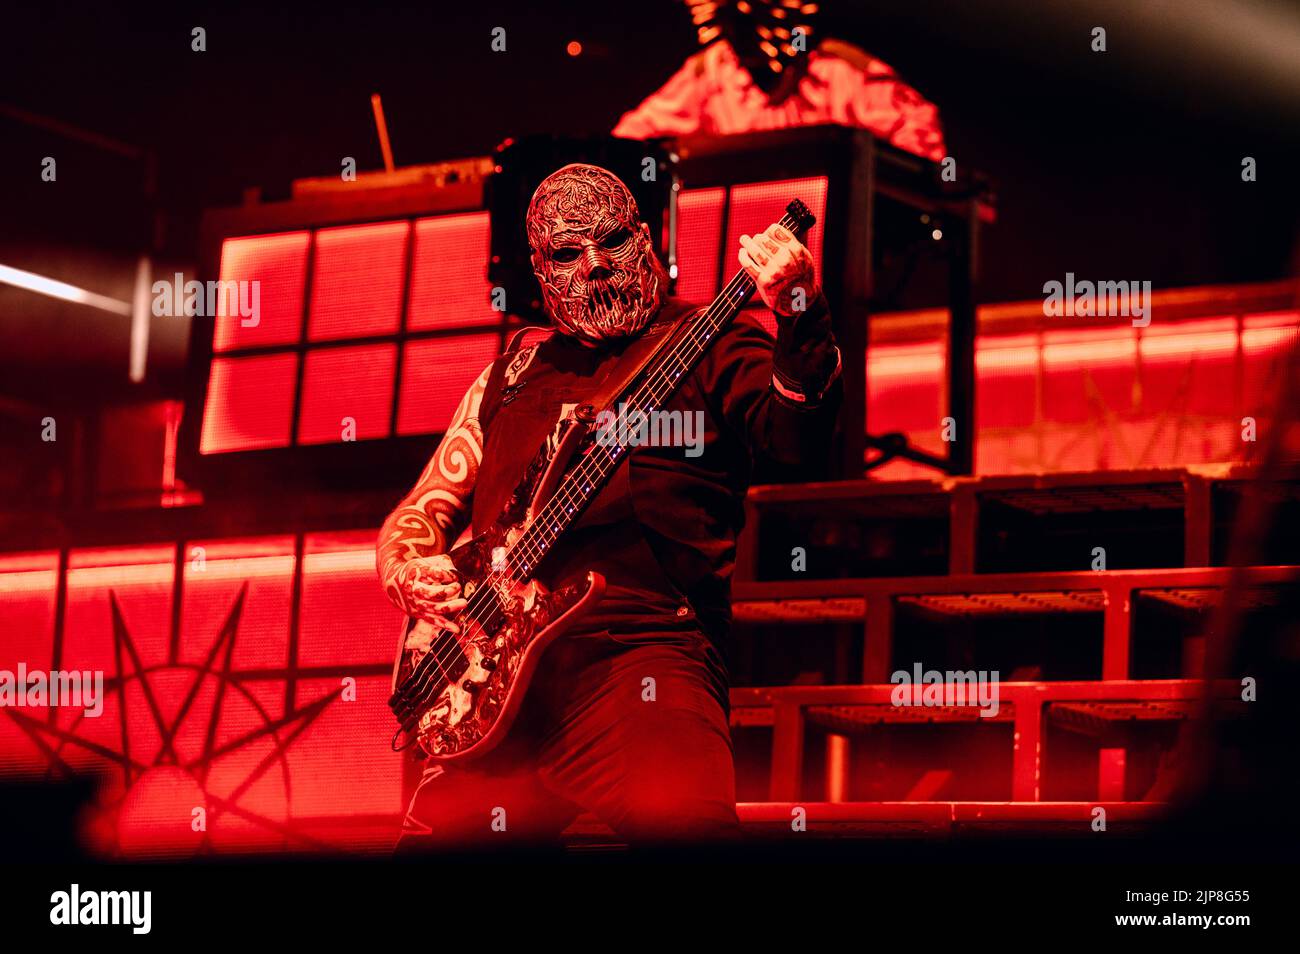 Malmoe, Sweden. 15th Aug, 2022. The American heavy metal band Slipknot performs a live concert at Malmö Arena in Malmoe. Here bass player Alessandro Venturella is seen live on stage. (Photo Credit: Gonzales Photo/Alamy Live News Stock Photo